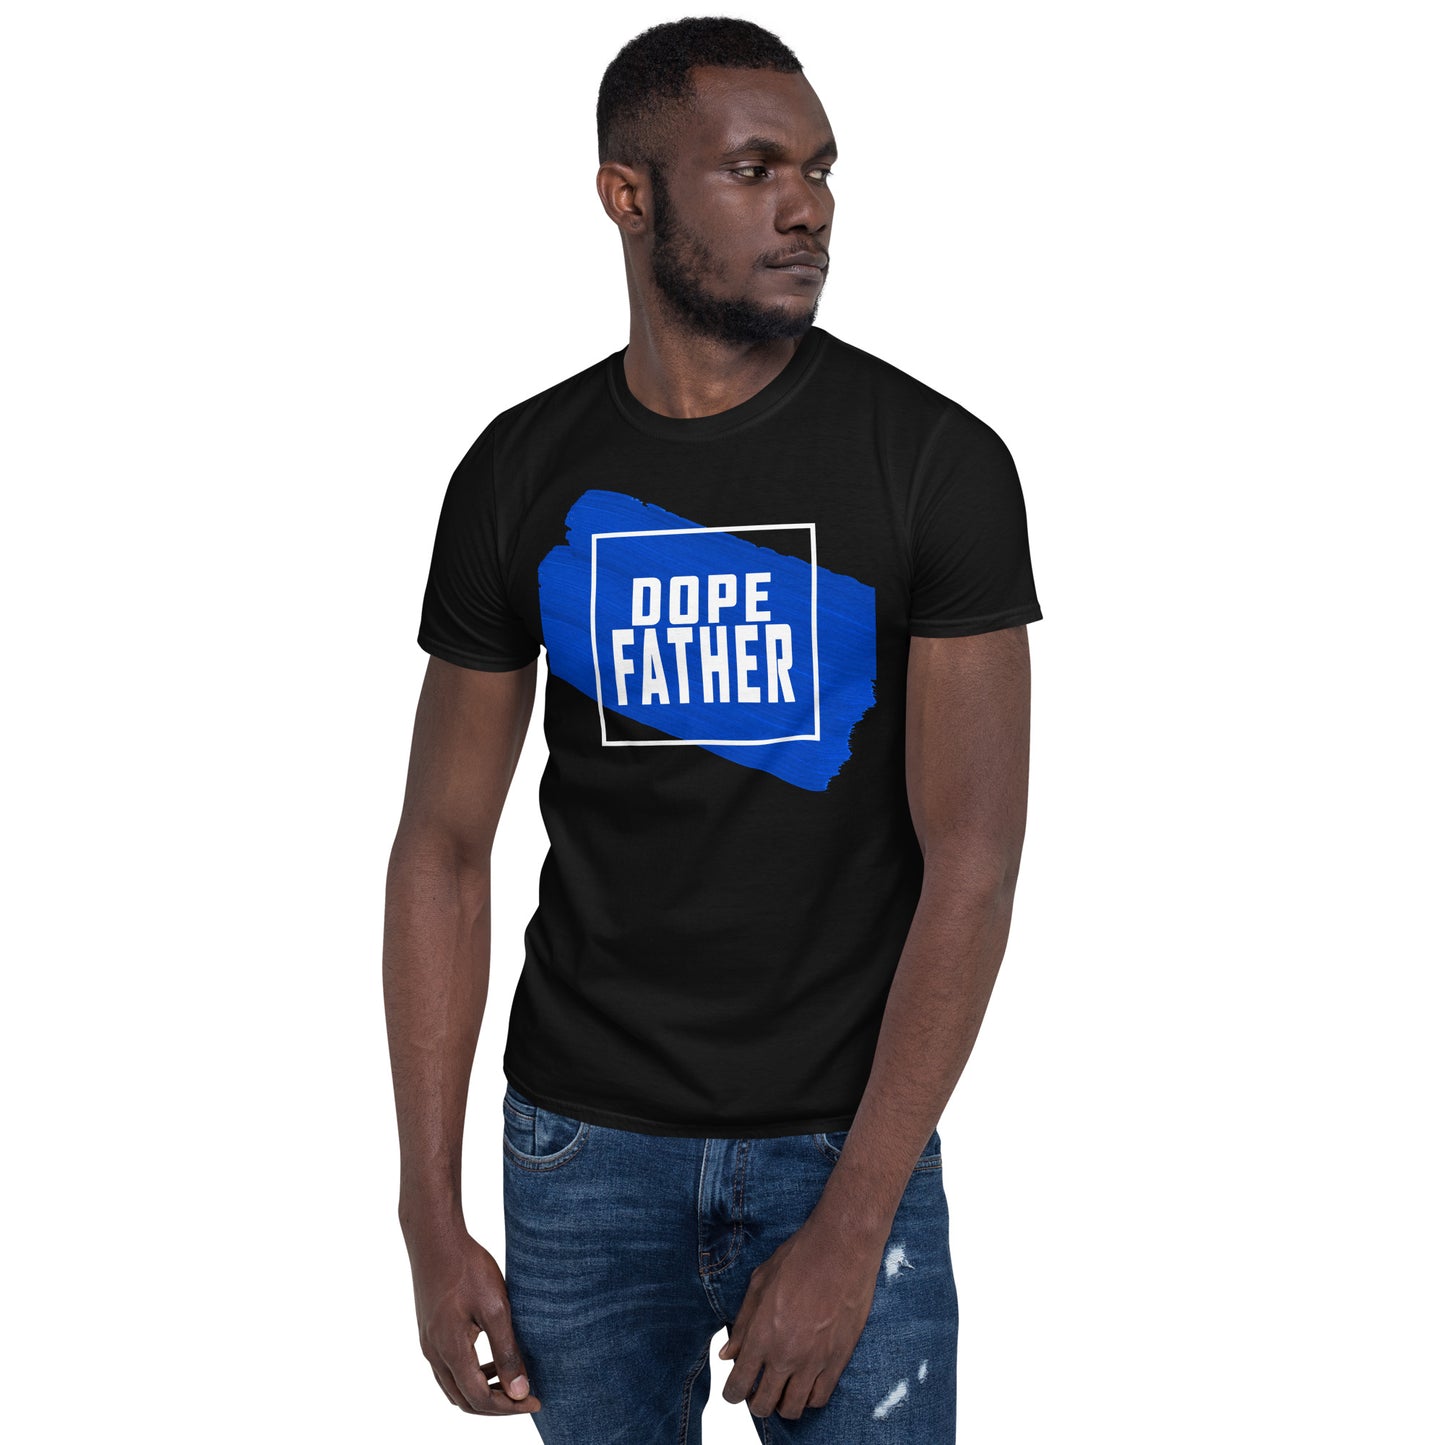 Adult "Dope Father" T-Shirt